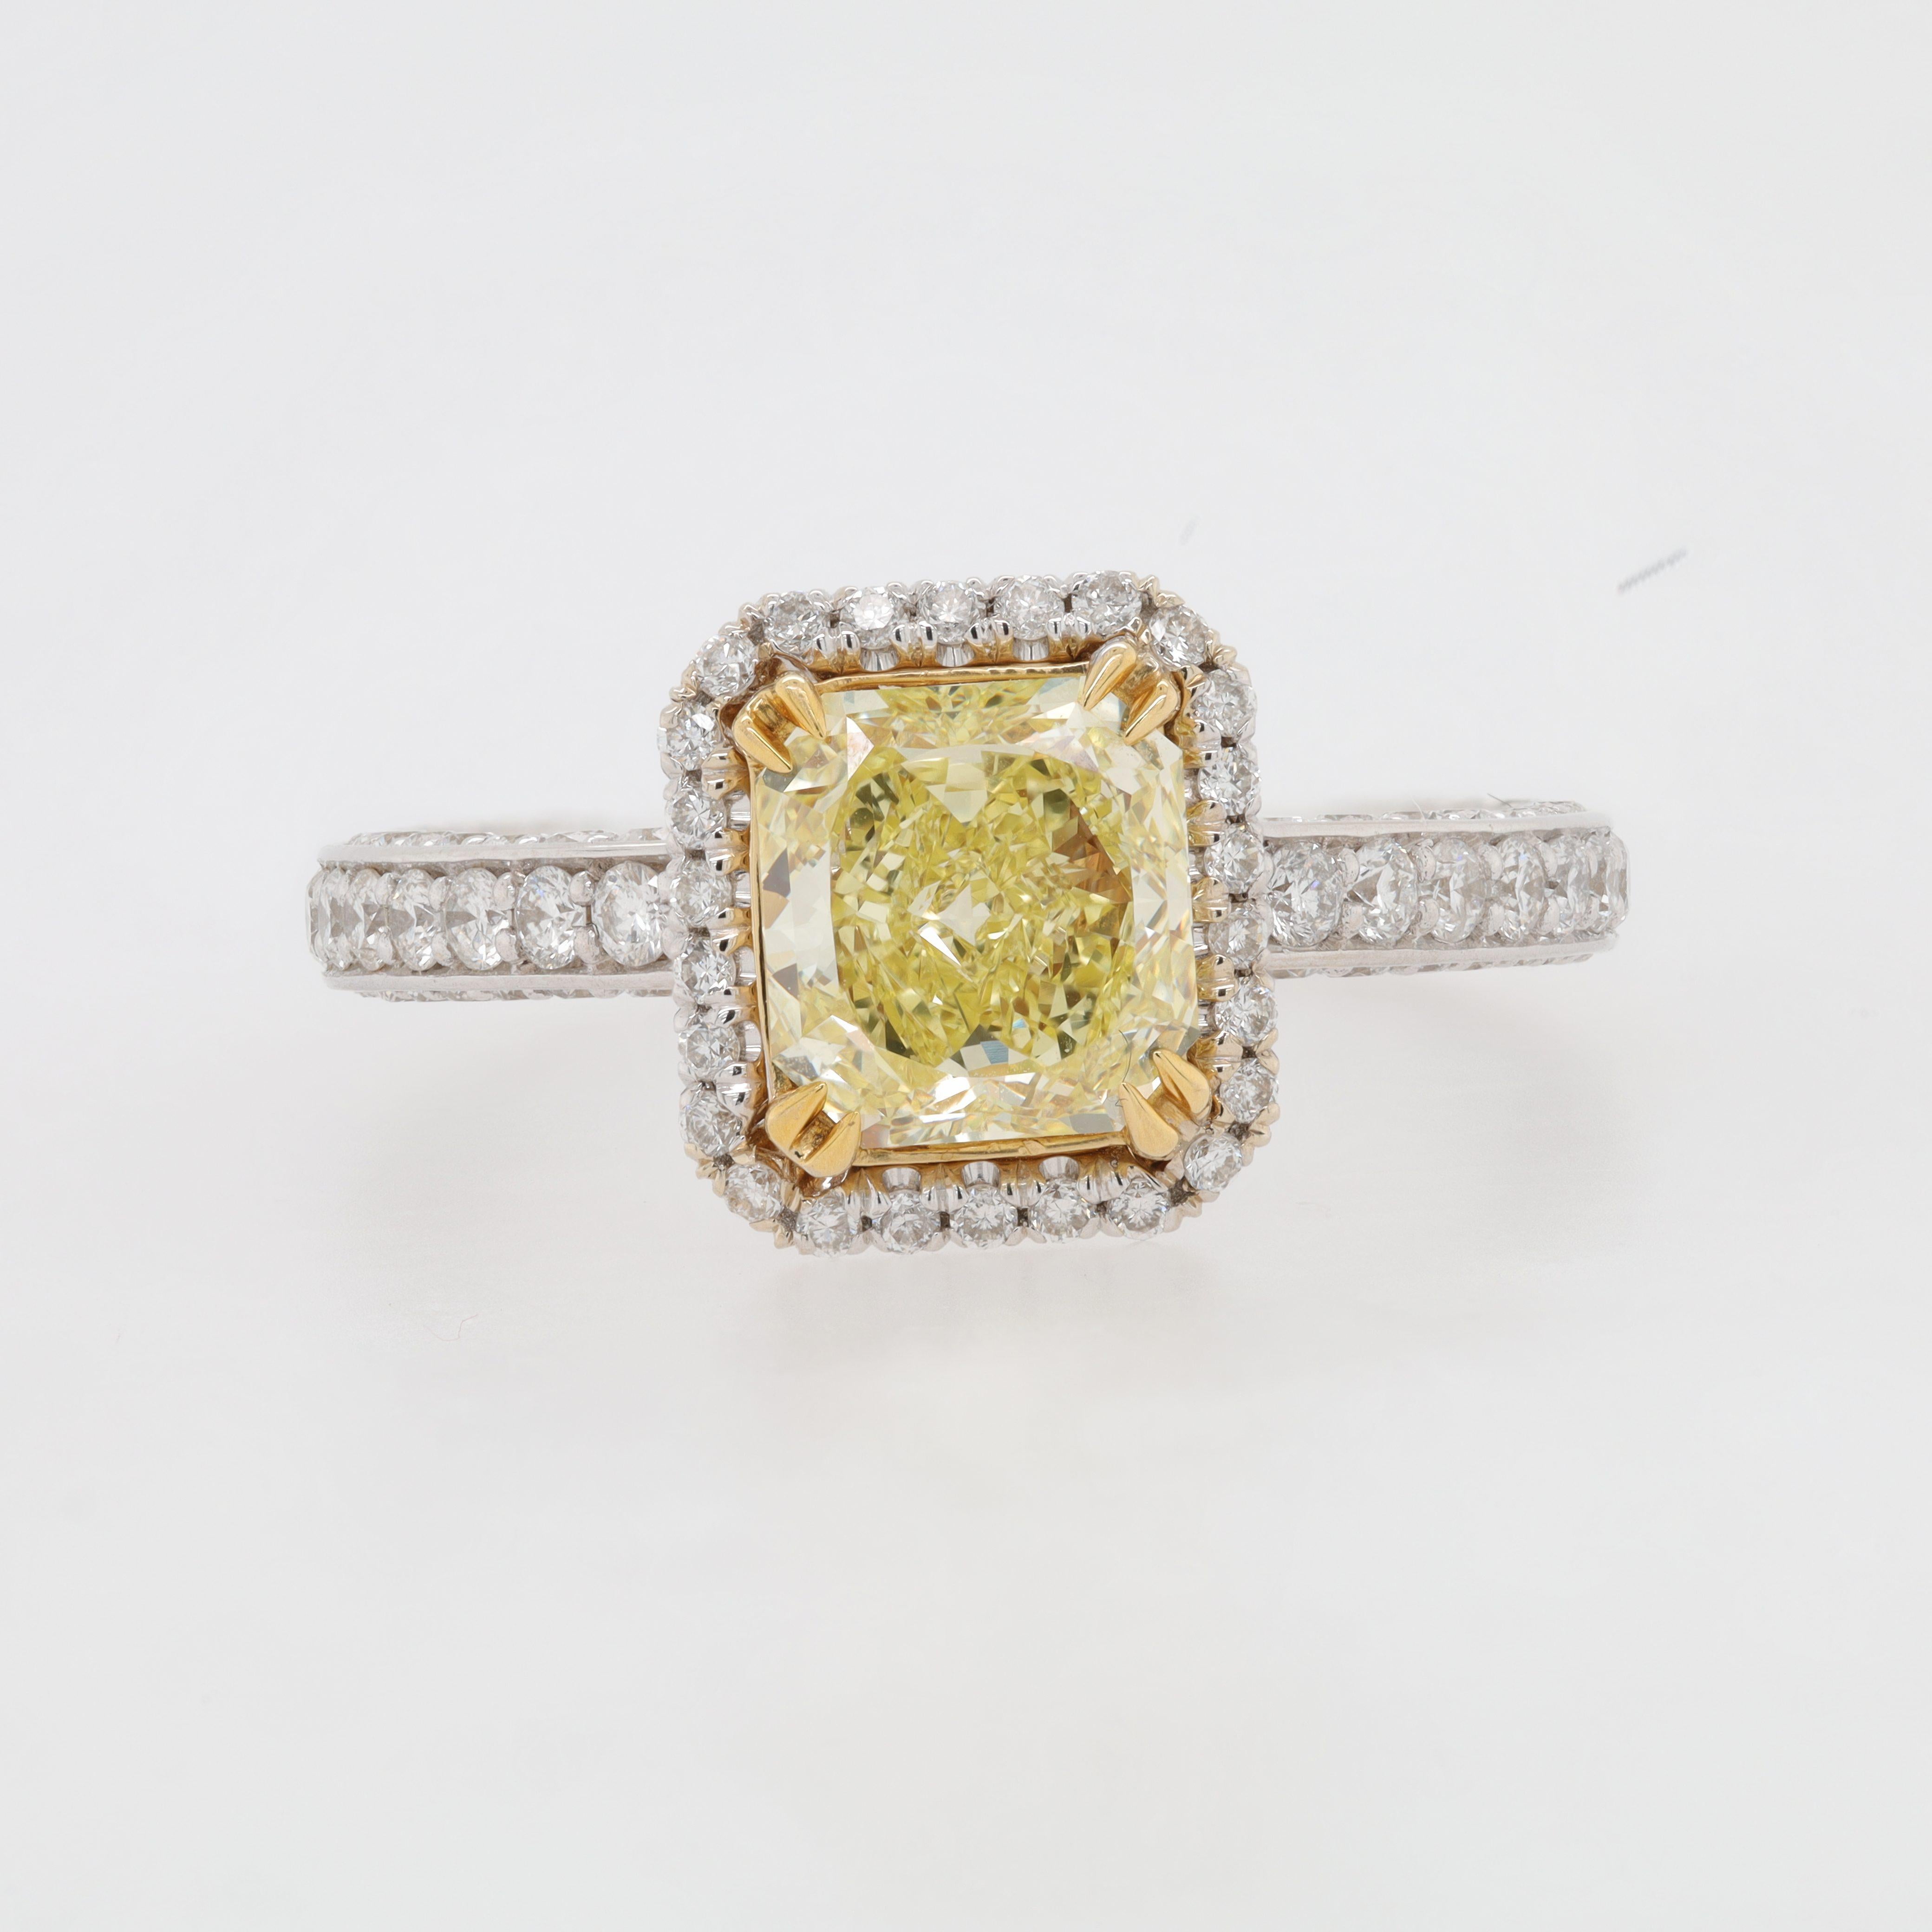 18 kt white gold engagement ring featuring a center 1.39 ct GIA certified (FIY VS2) fancy intense yellow radient  cut diamond surrounded by 1.16 cts tw of diamonds in a halo design 
Diana M. is a leading supplier of top-quality fine jewelry for over